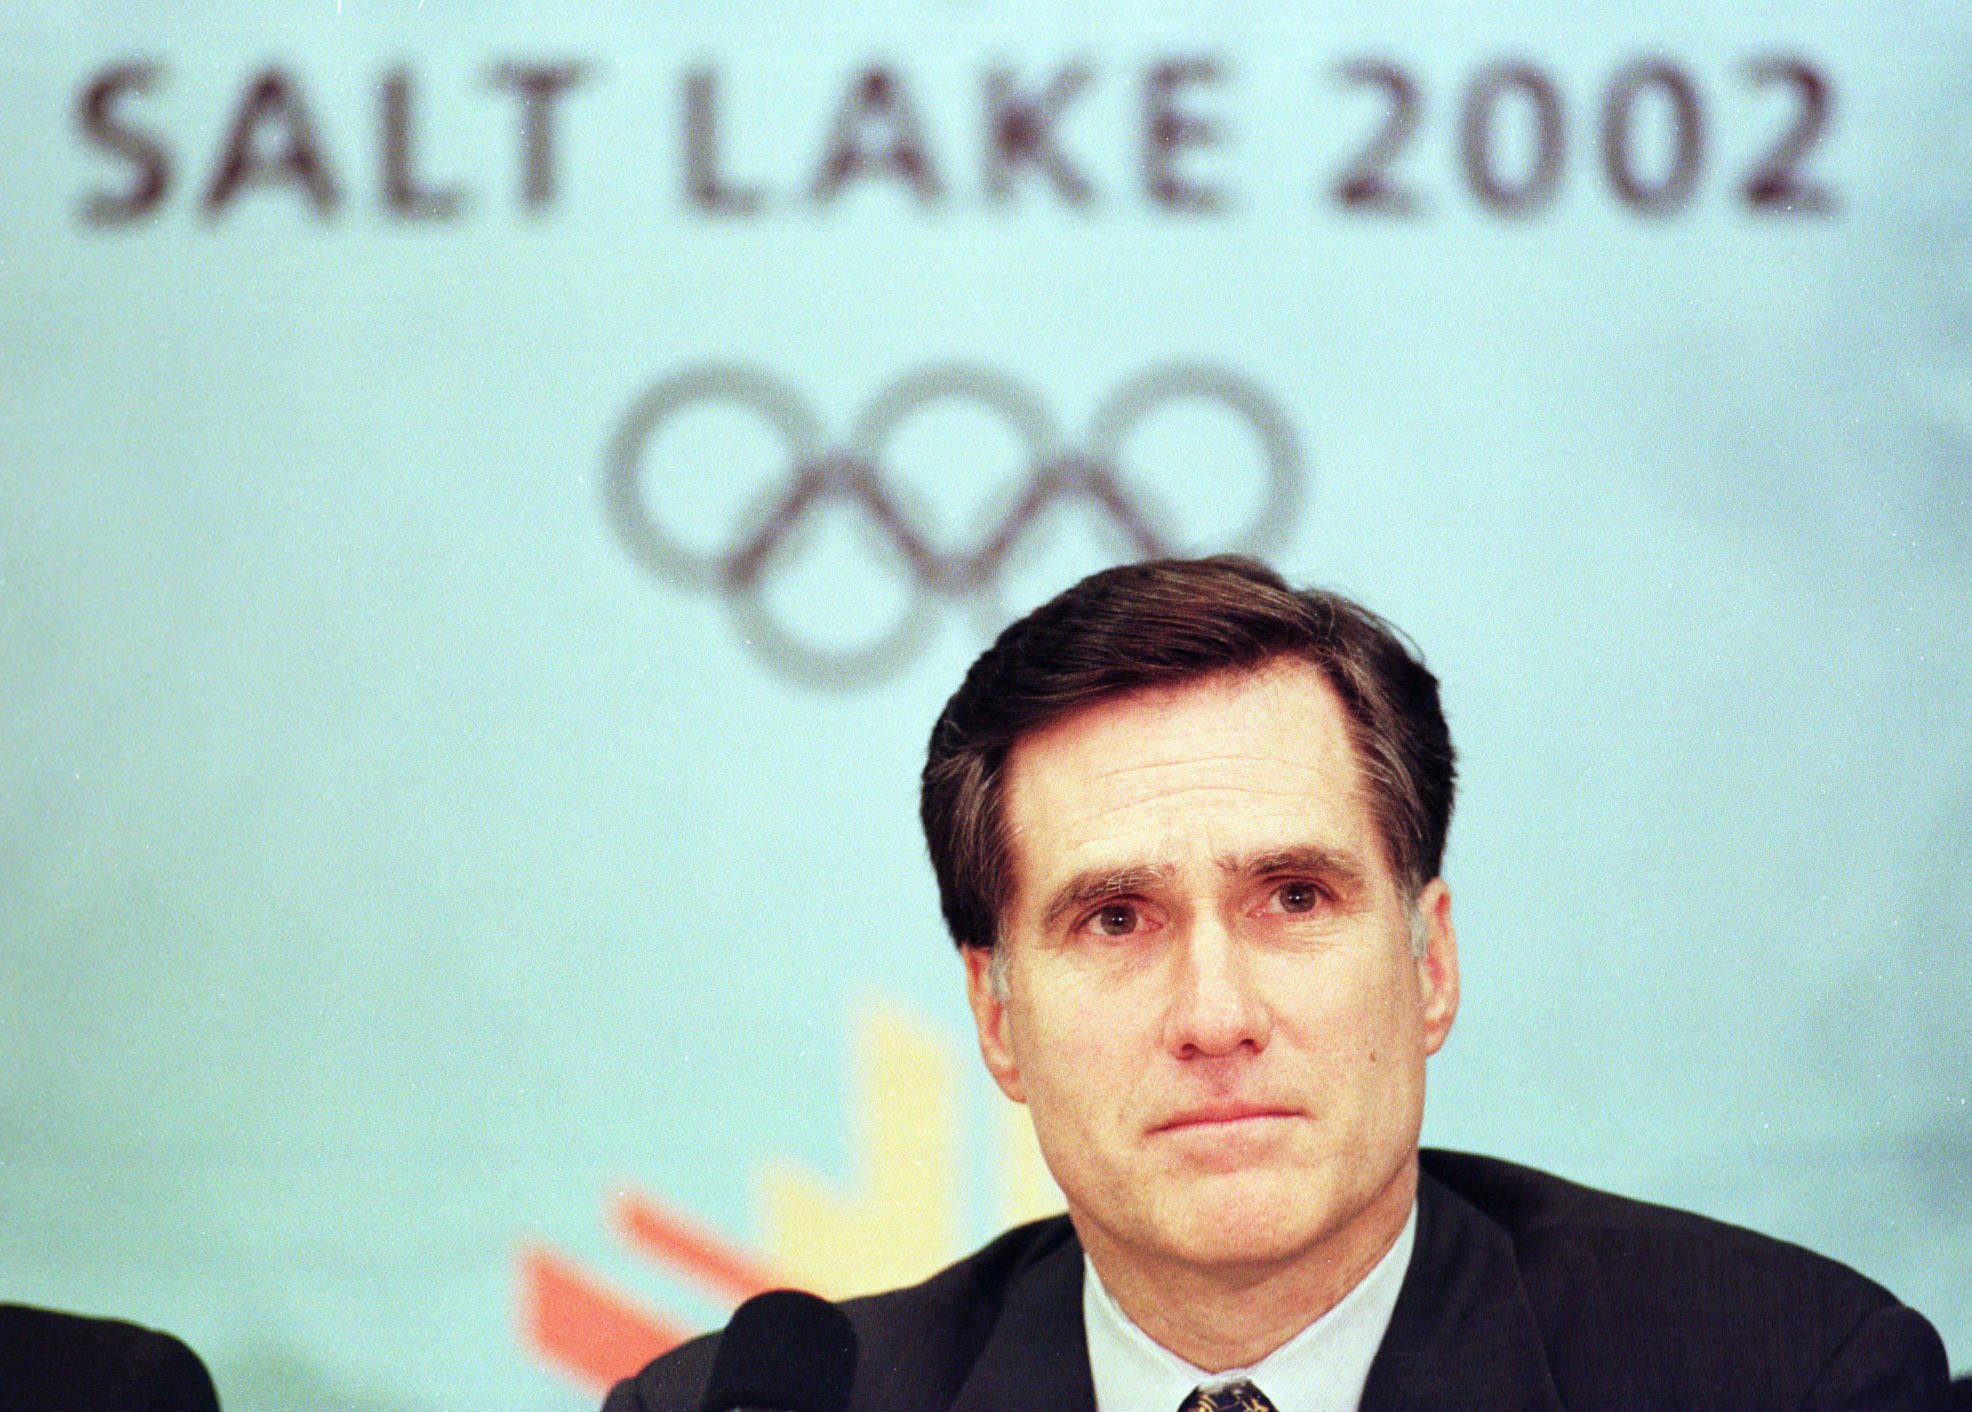 Senator Mitt Romney, who co-sponsored the LA28 Olympic coin legislation, was chief executive of the Organising Committee for the 2002 Winter Olympics in Salt Lake City ©Getty Images